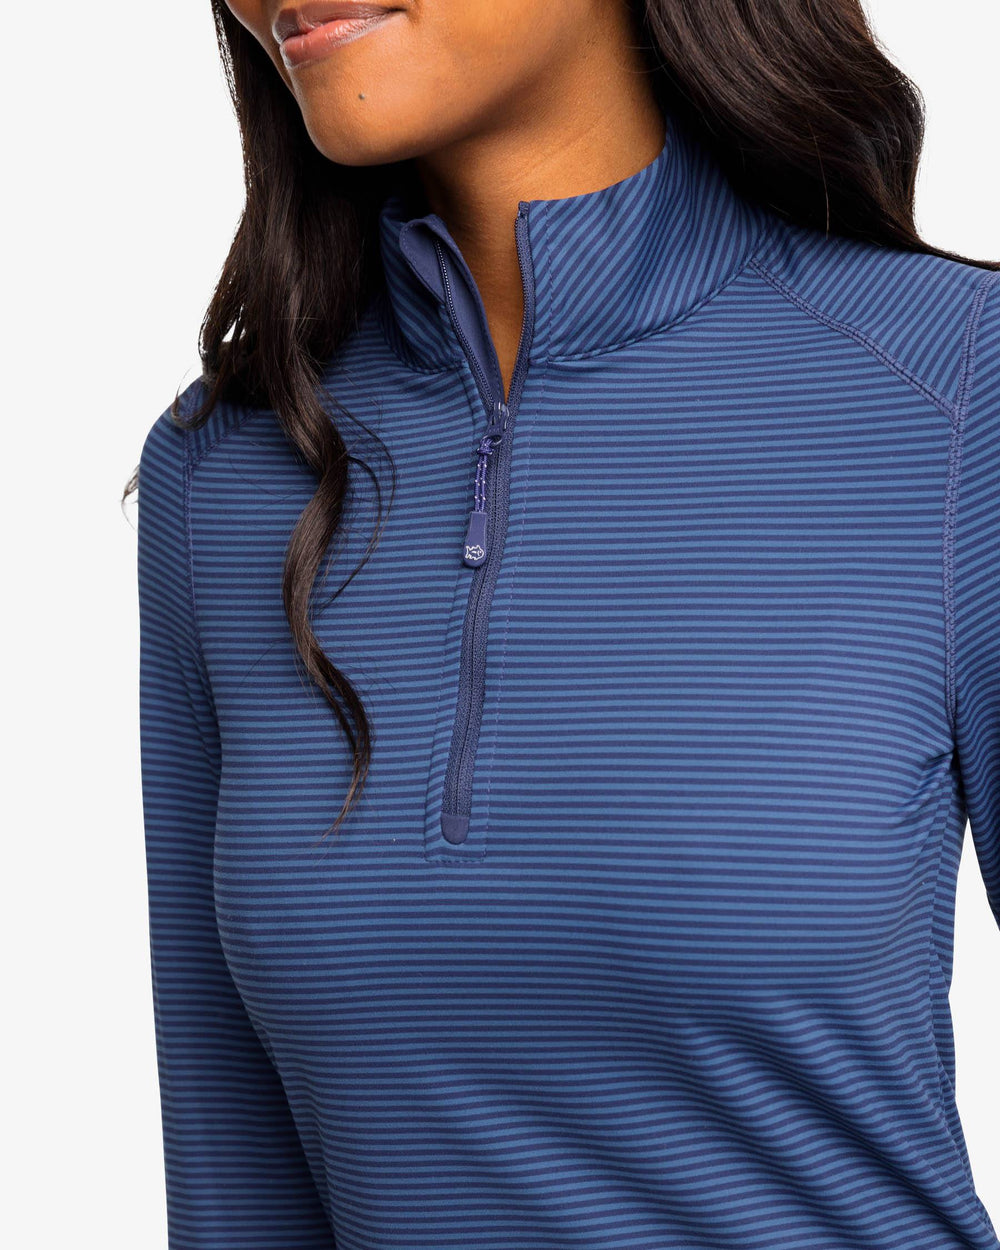 The detail view of the Runaround Performance Quarter Zip Pullover by Southern Tide - Nautical Navy